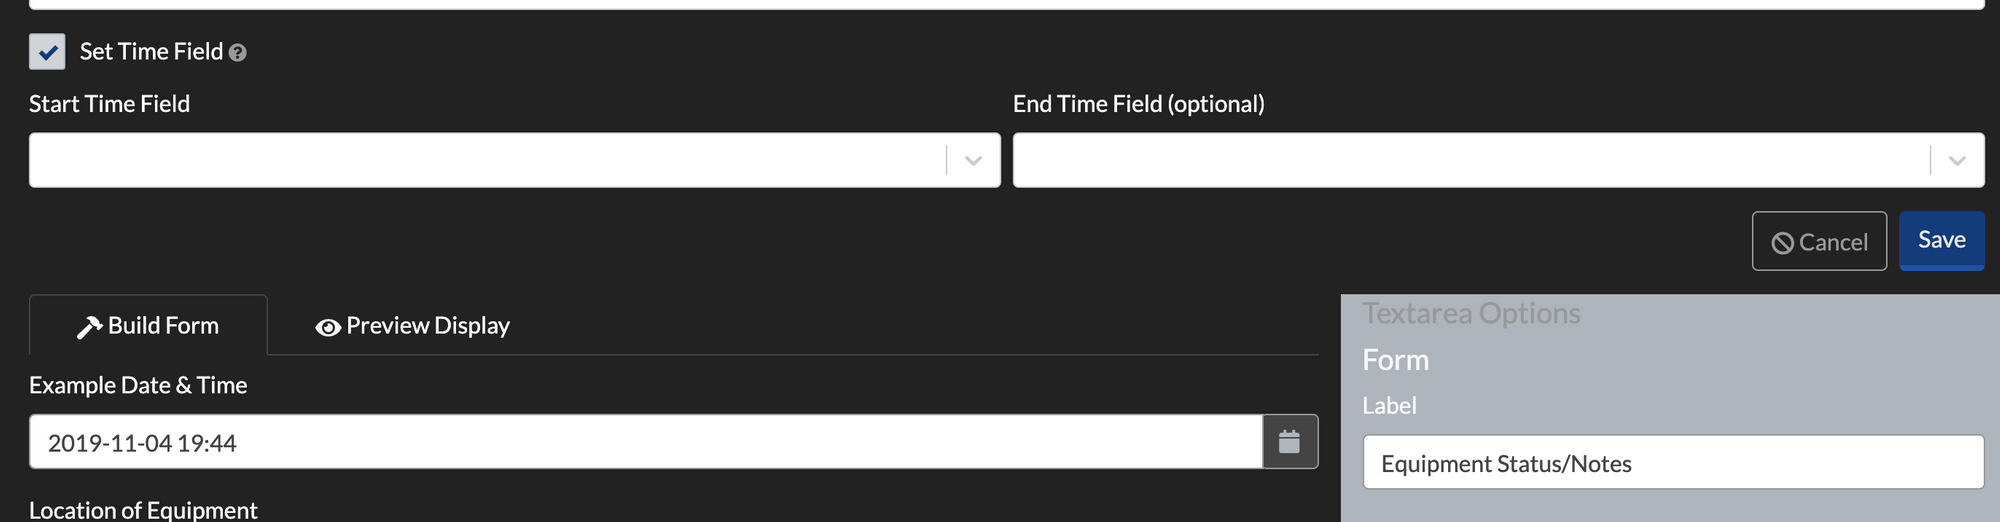 Report Entry Form Builder wit hSet Time Field selected